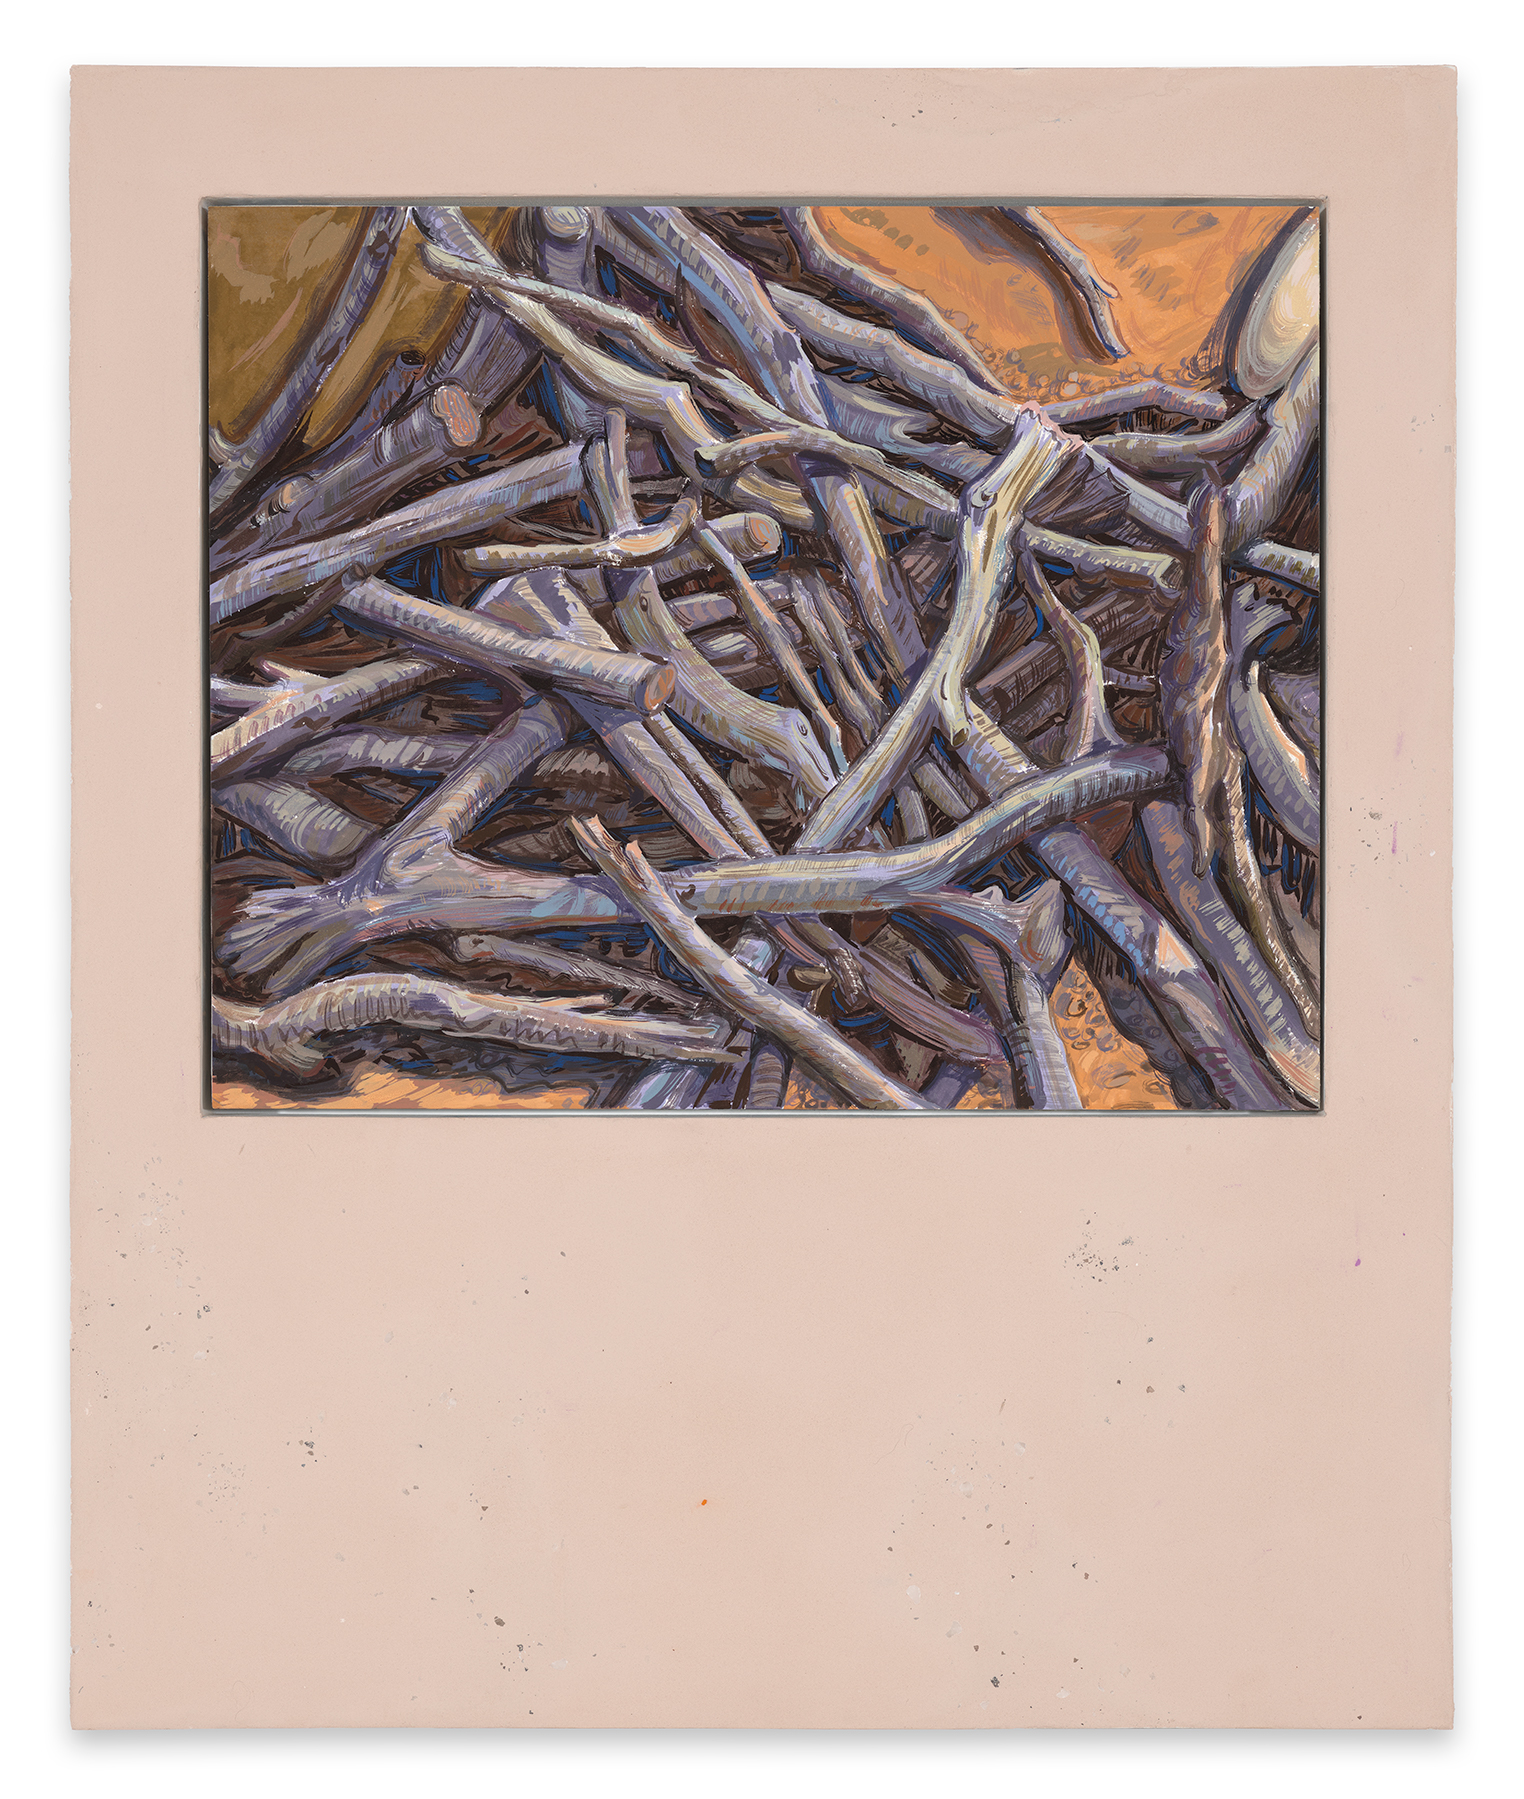 This image shows a painting which is framed in a pigmented pastel beige cream panel that includes fragments of earth and rocks from the sites where the paintings were made. The composition draws the viewer to meditate on a pile of dry slivery sticks, stacked on a curry-nutmeg-peach colored ground, at sunset or sunrise. The ground itself is painted in shades of peach, yellow, and brown with purple, gray and blue chalky shadows.  The gray sticks are a densely stacked pile of straight, curved, and oddly shaped pieces of small tree branches that are sawed and frayed on the edges, splaying in all directions of the picture plane without any context. The twigs are formed with linear hash marks, curvilinear lines, squiggles, dots and swathes of color in pastel shades of gray, blue, lavender, green, yellow, peach, pink, brown, white, and cream.